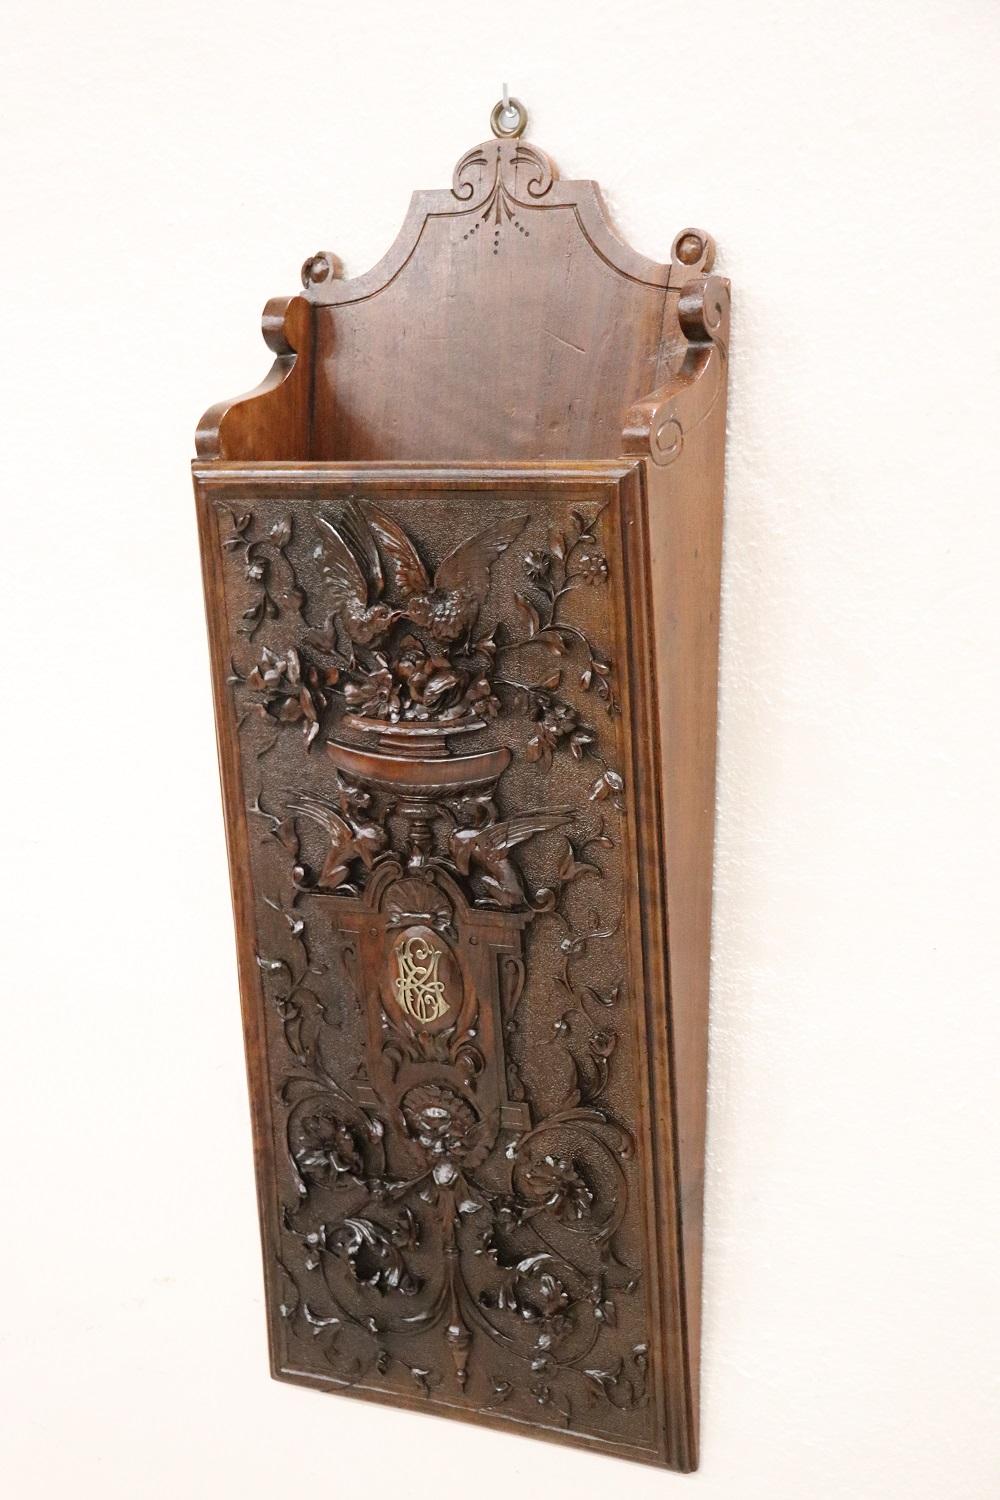 Beautiful Italian renaissance style wall magazine rack, 1880. Made of solid walnut wood. Characterized by a refined and elaborate decoration carved in the wood. Many decorative elements of Renaissance taste such as two winged dragons and a grotesque